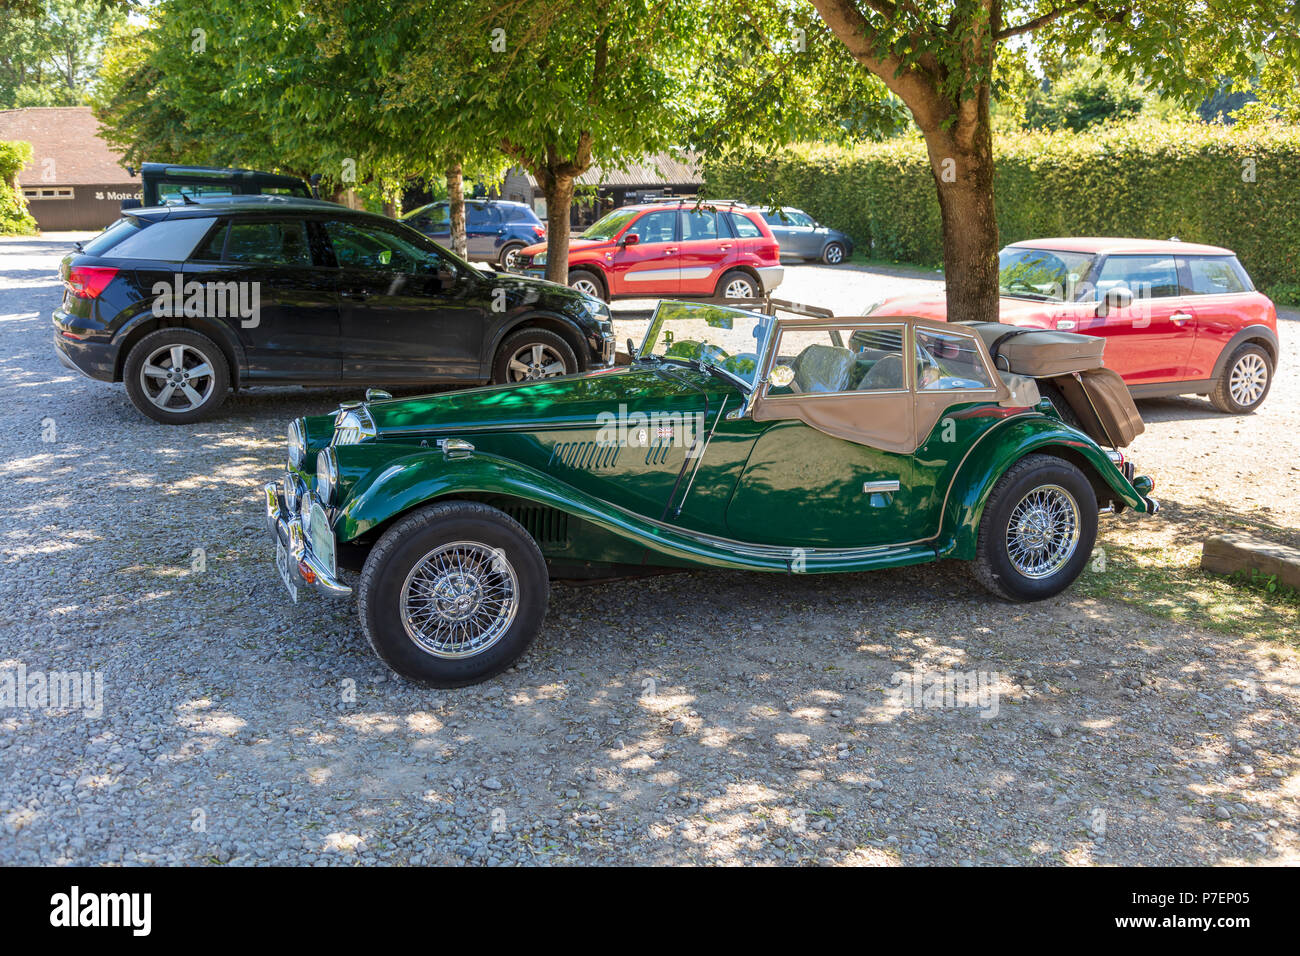 A Naylor T1700 restored British built sports car built in the 1980's in Shipley, parked at Ightam Mote car Park. Kent, UK Stock Photo